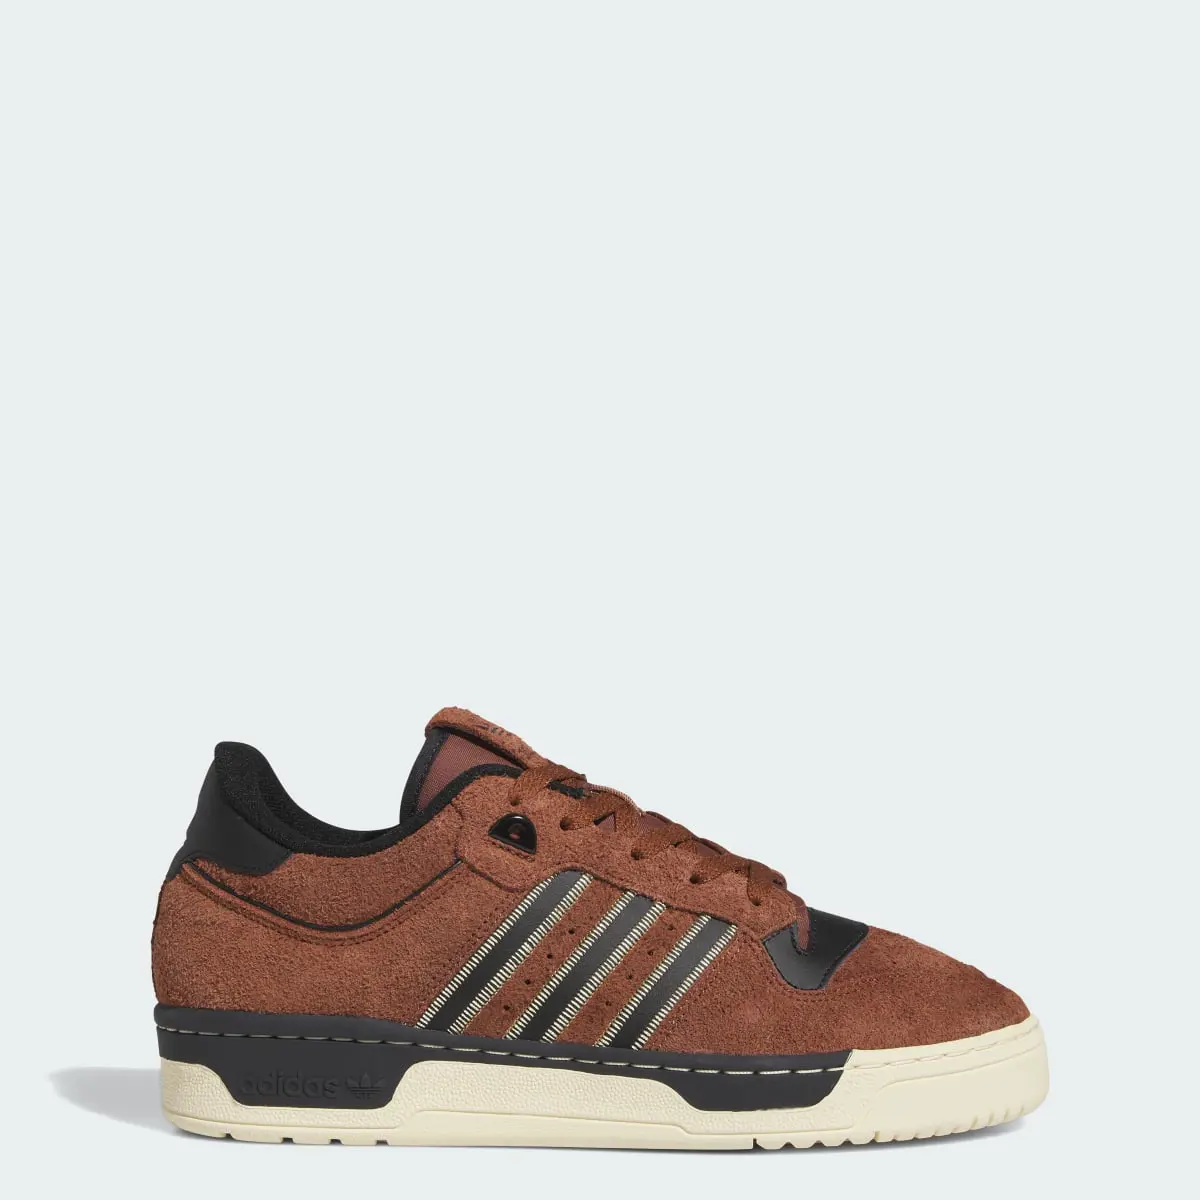 Adidas Sapatilhas Rivalry 86 Low. 1